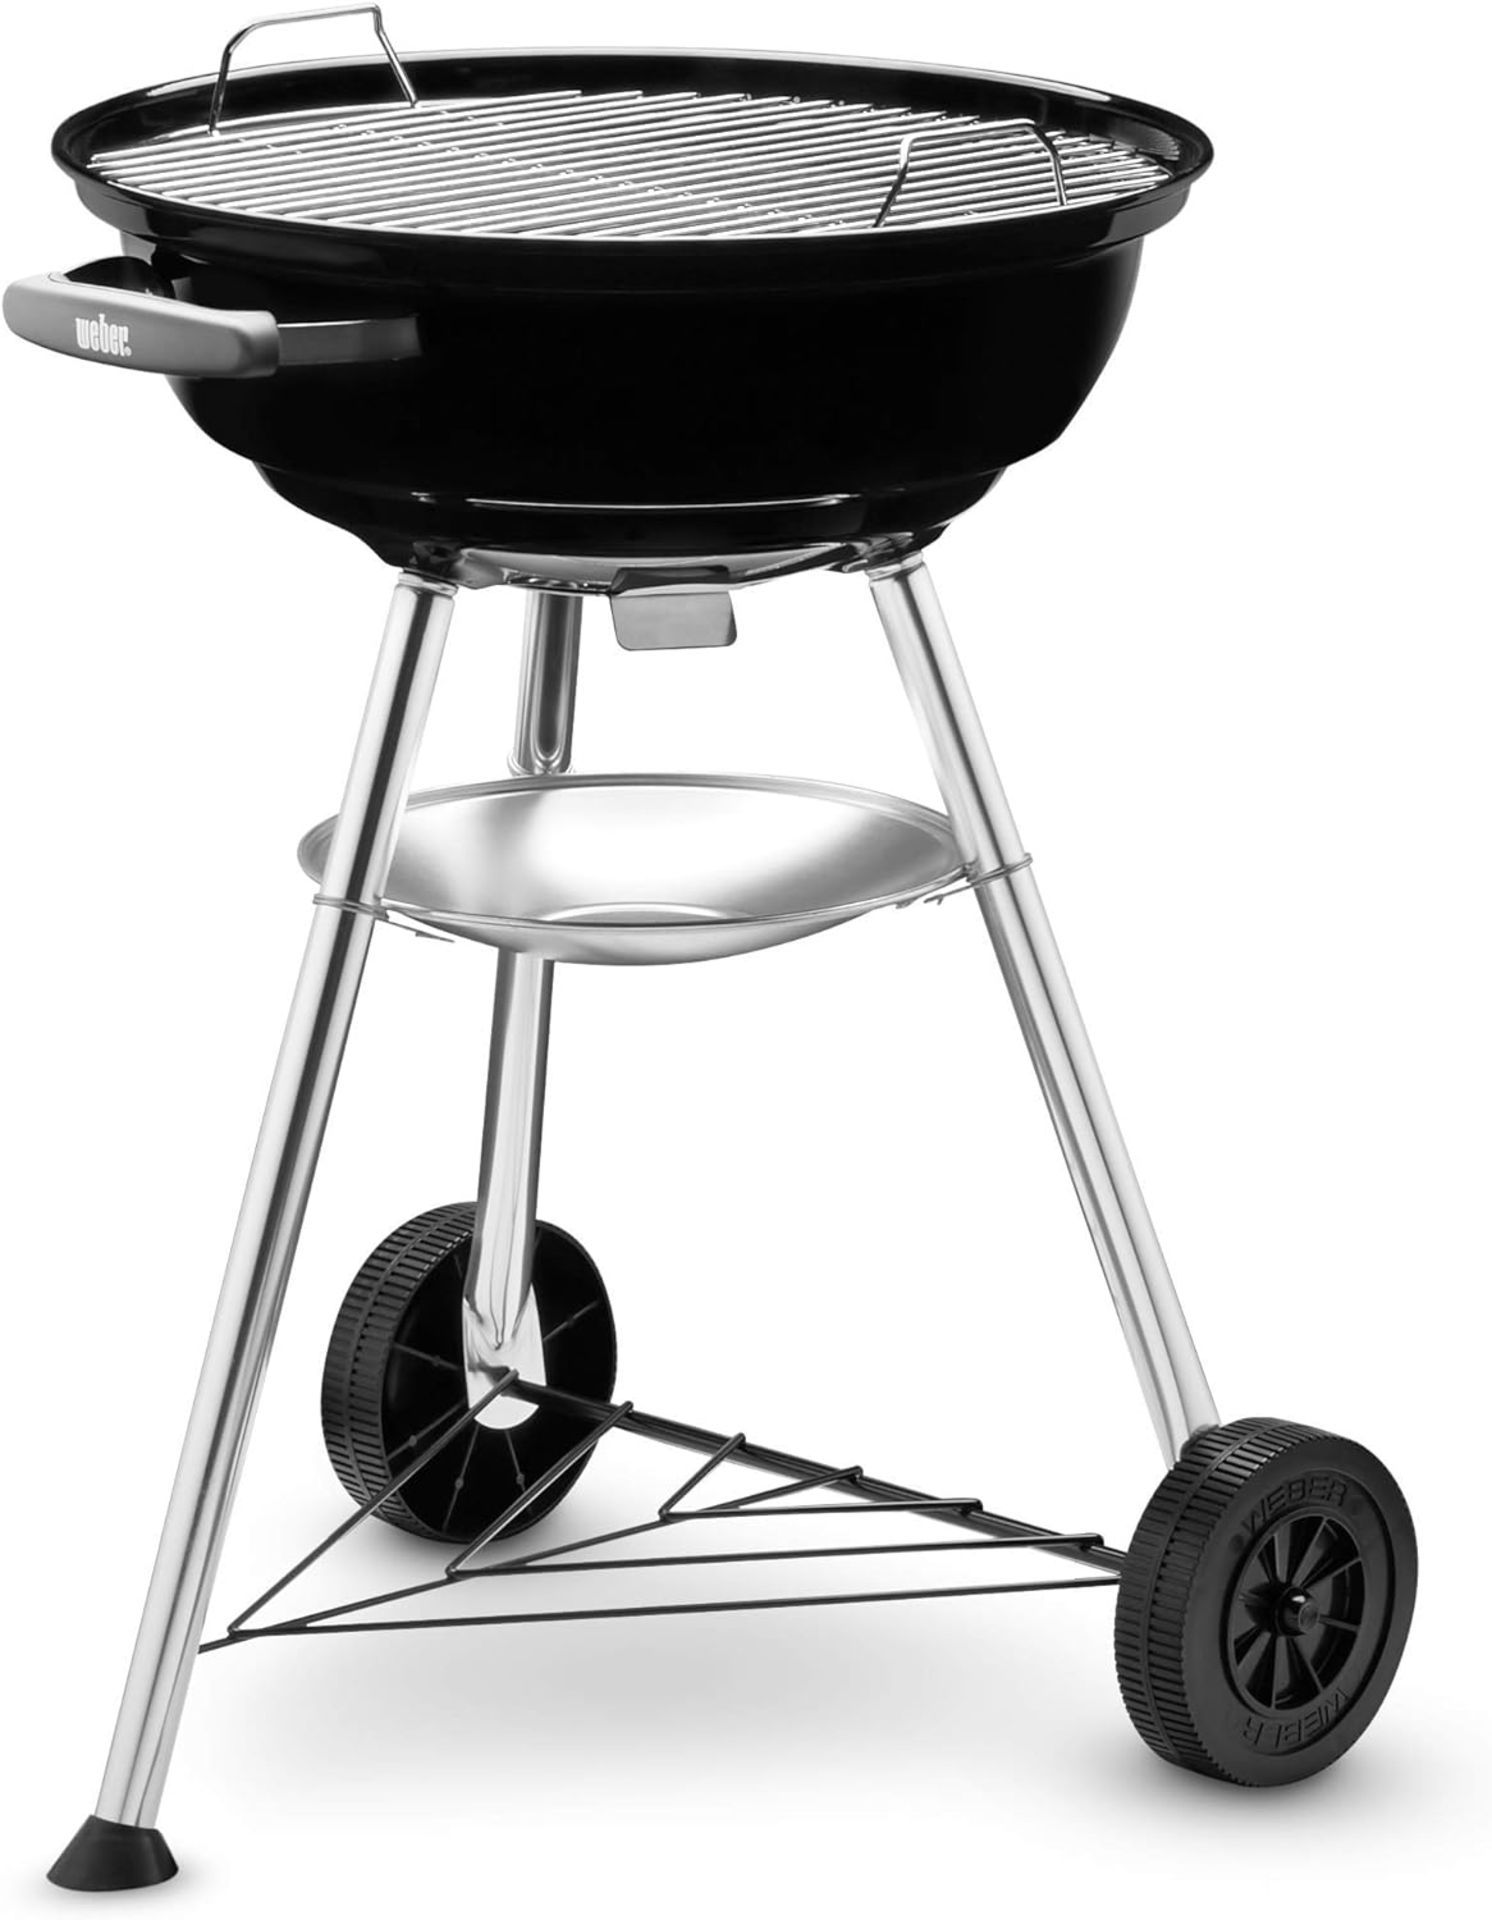 NEW & BOXED WEBER Compact 47cm Charcoal Barbecue. RRP £109.99 EACH. Whether sizzling hot dogs, - Image 5 of 5